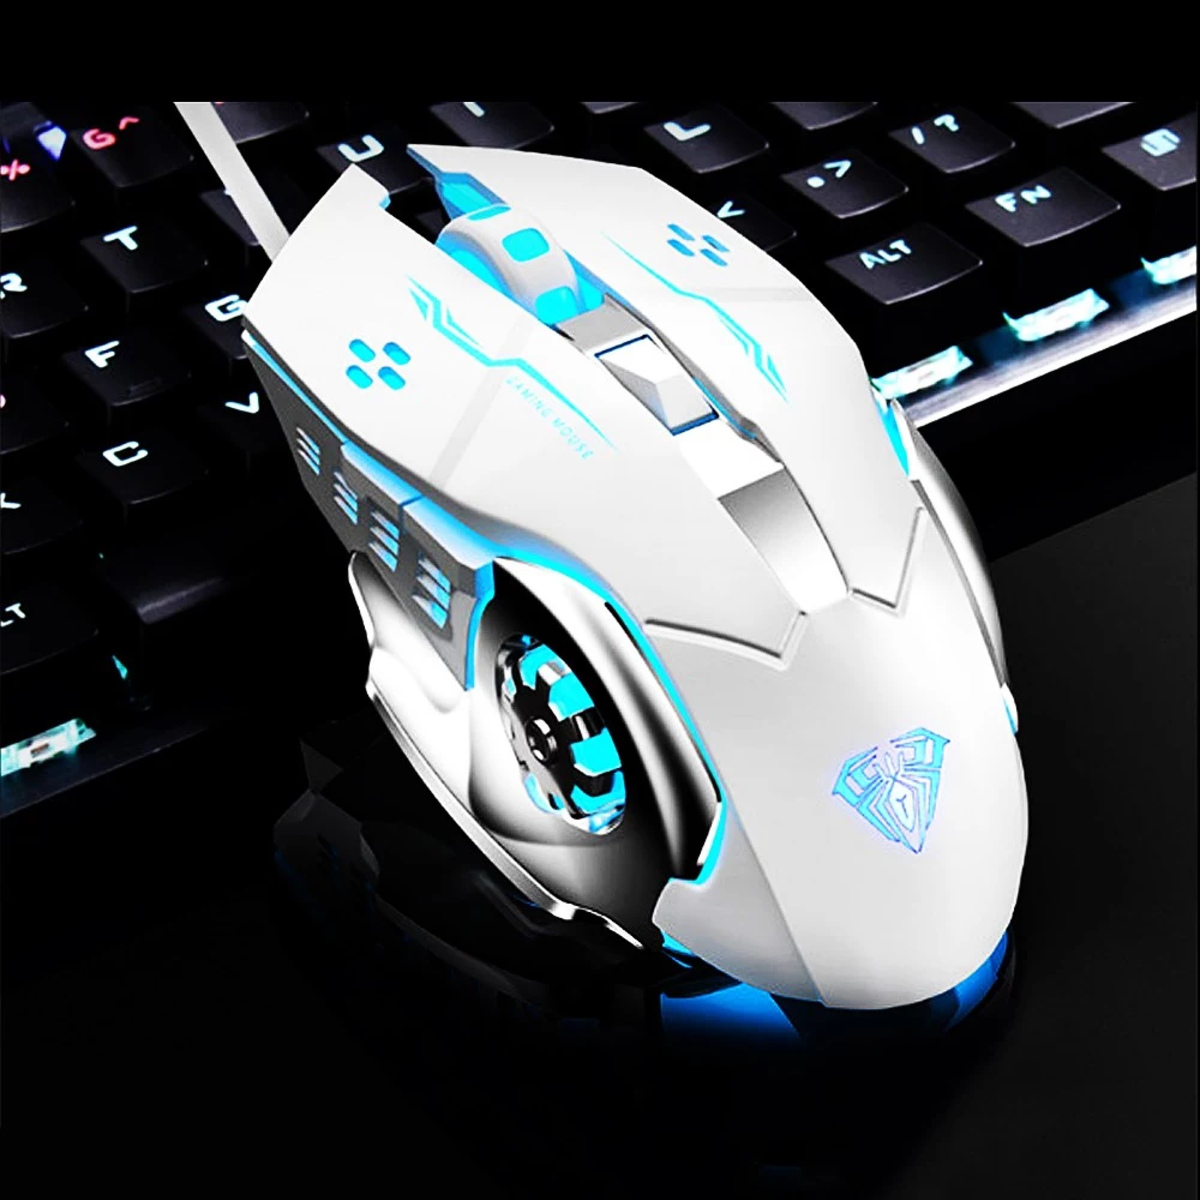 How To Change The Color On The Crossfire Ii Aula Gaming Mouse